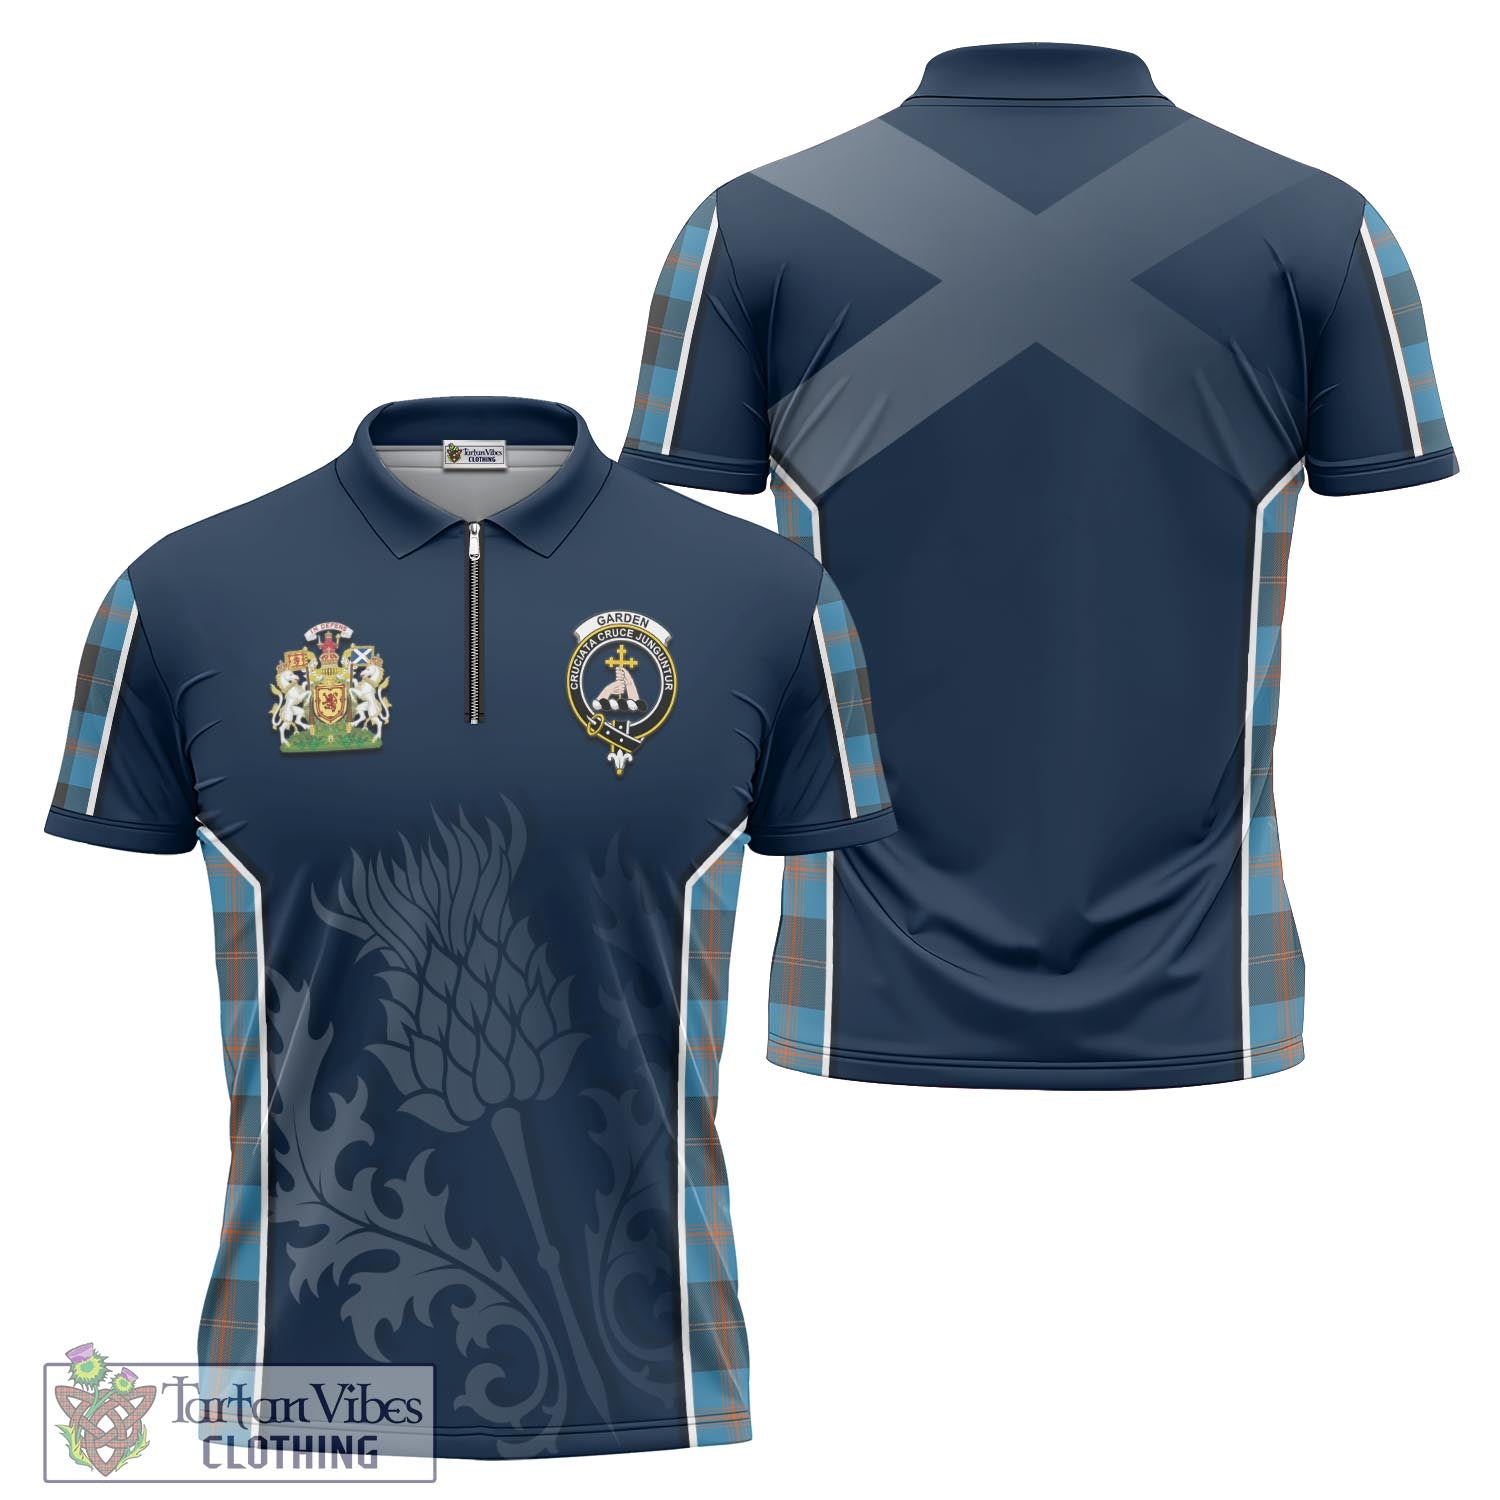 Tartan Vibes Clothing Garden Tartan Zipper Polo Shirt with Family Crest and Scottish Thistle Vibes Sport Style